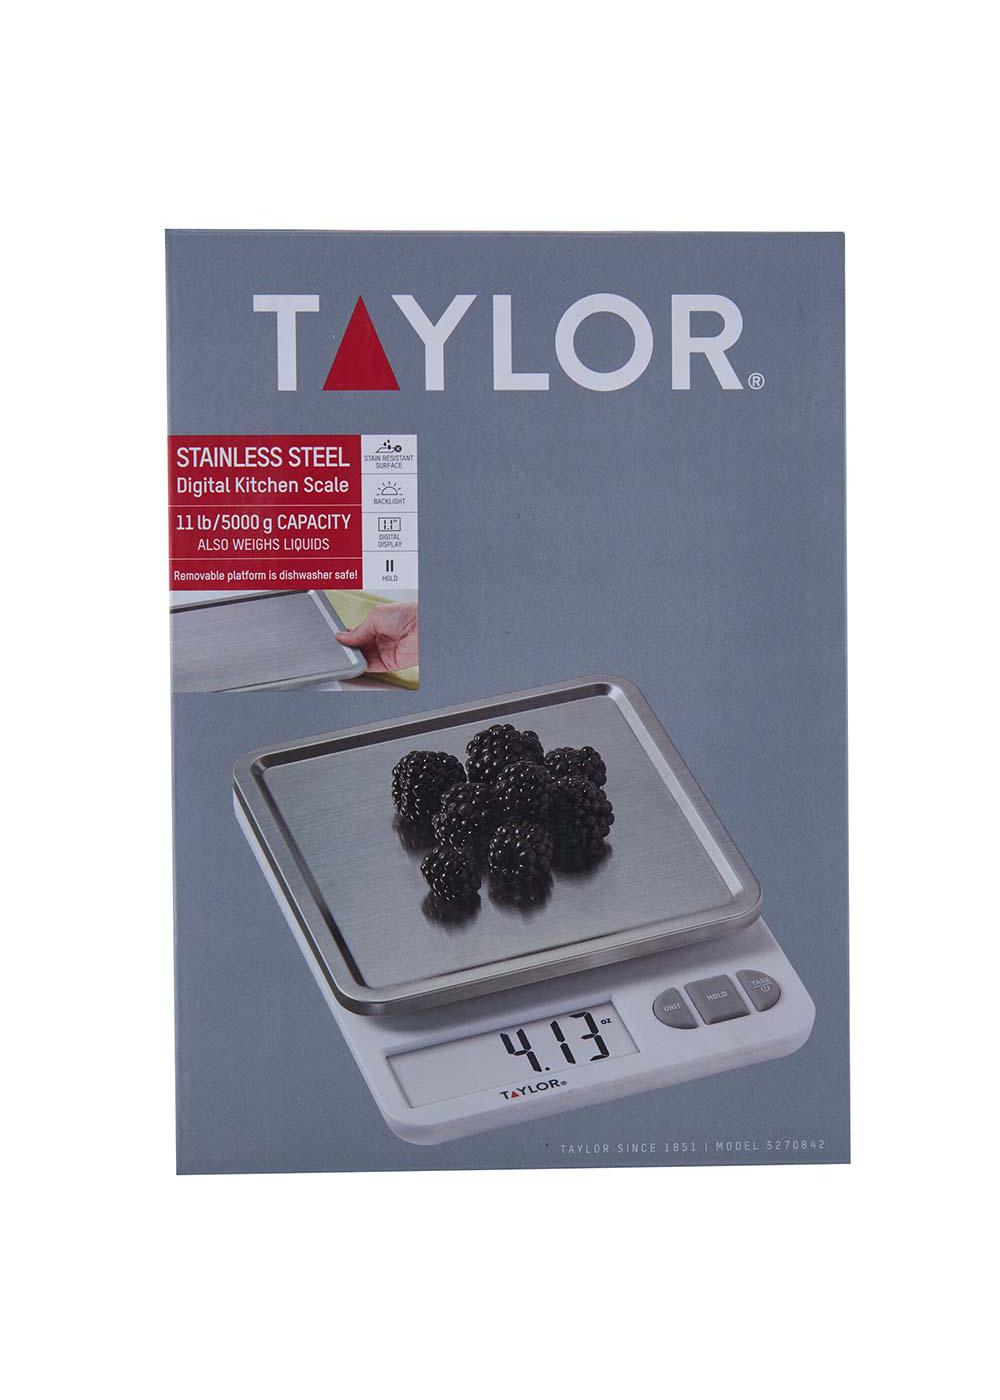 Taylor Stainless Steel Digital Kitchen Scale; image 1 of 3